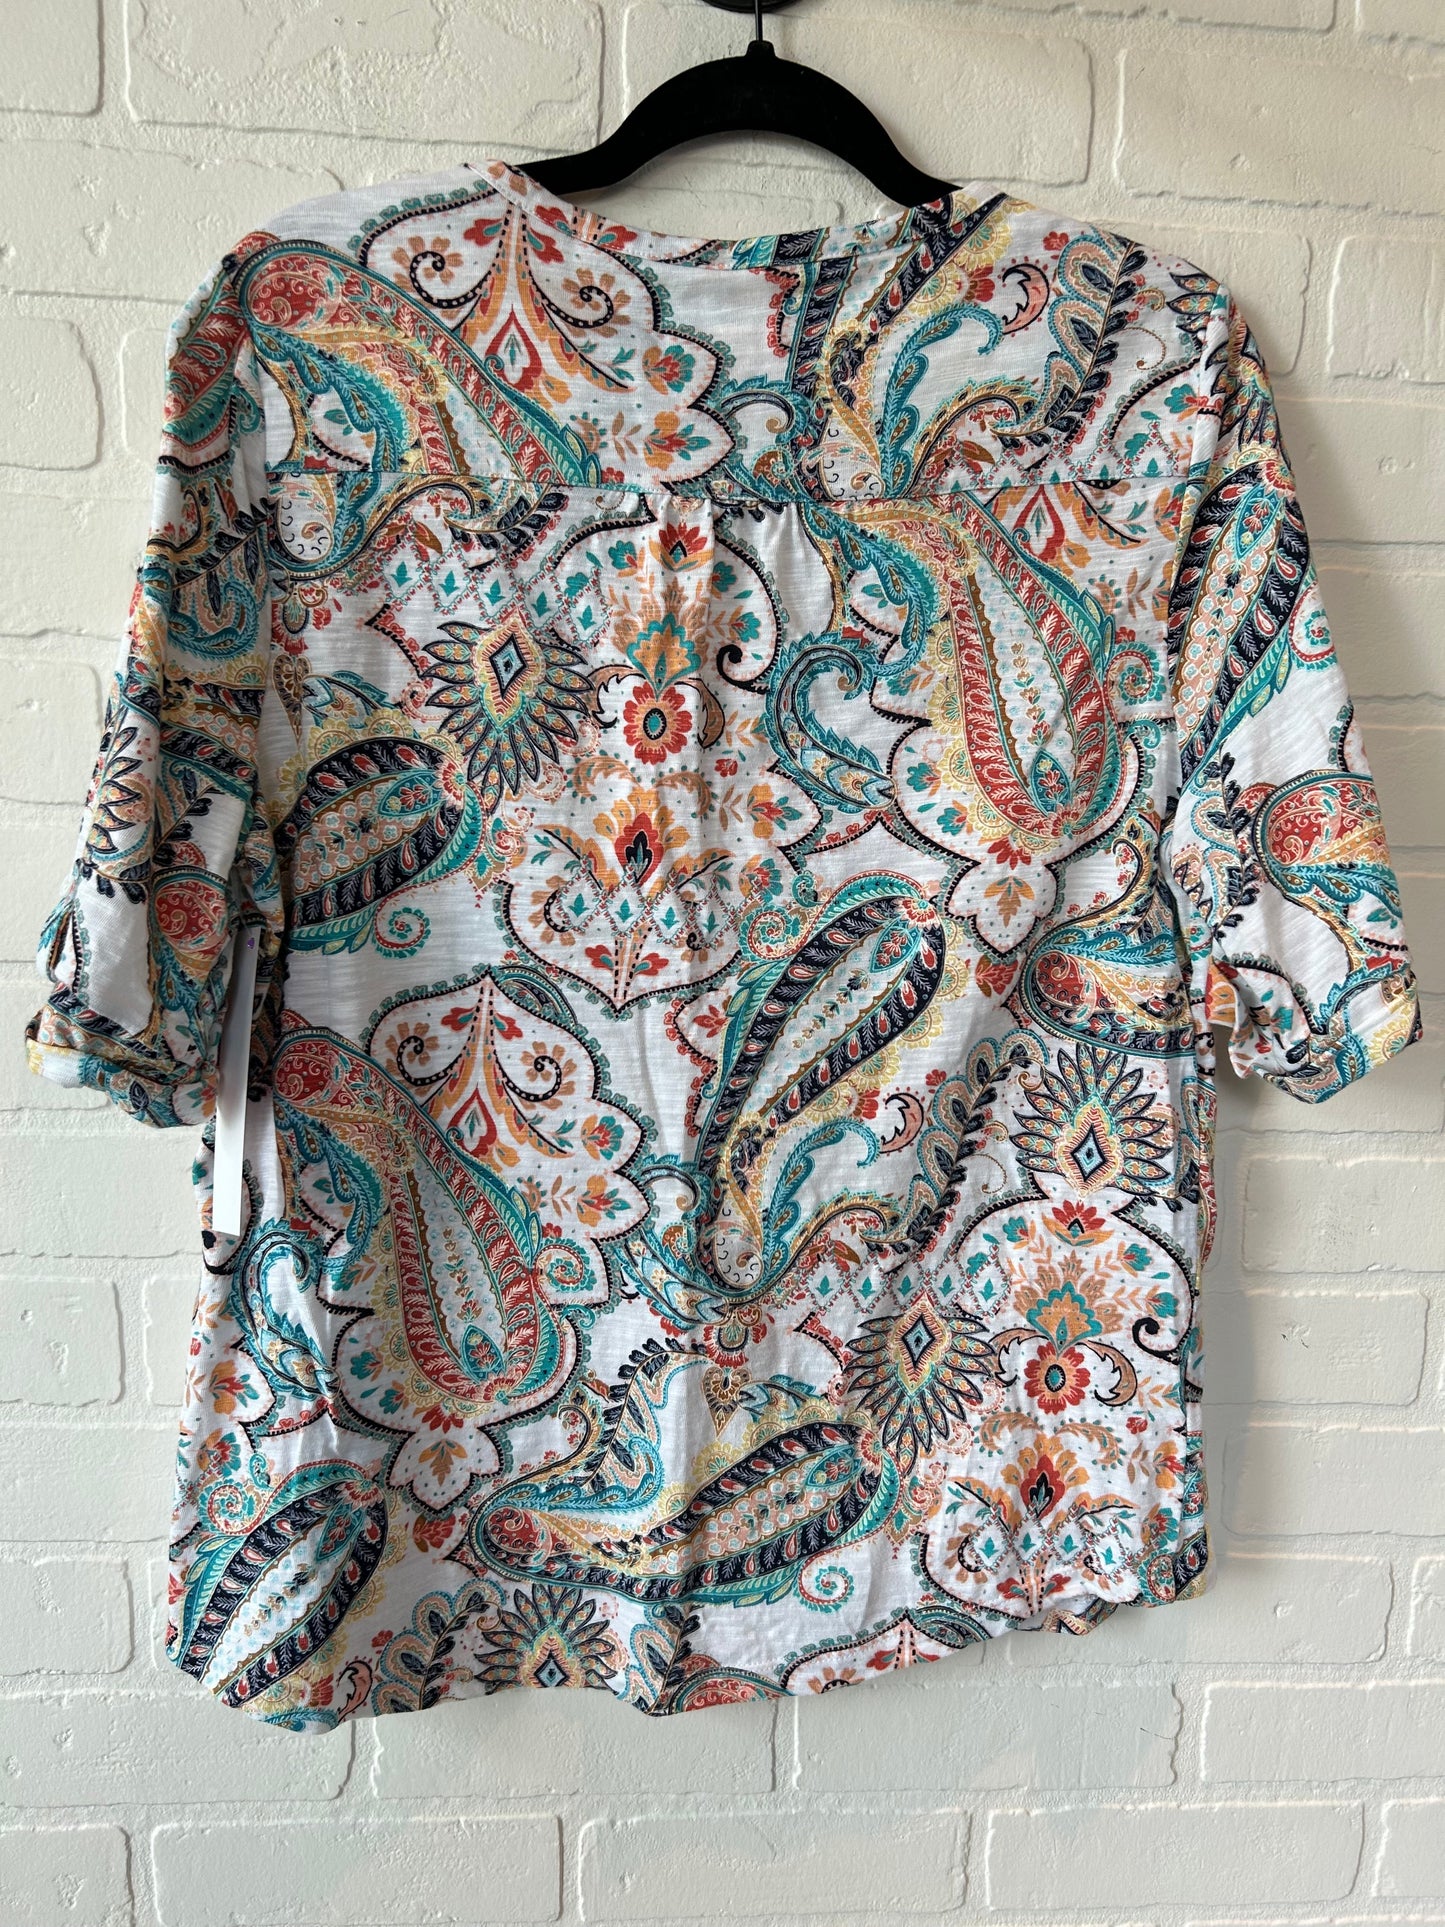 Multi-colored Top Short Sleeve Chicos, Size L